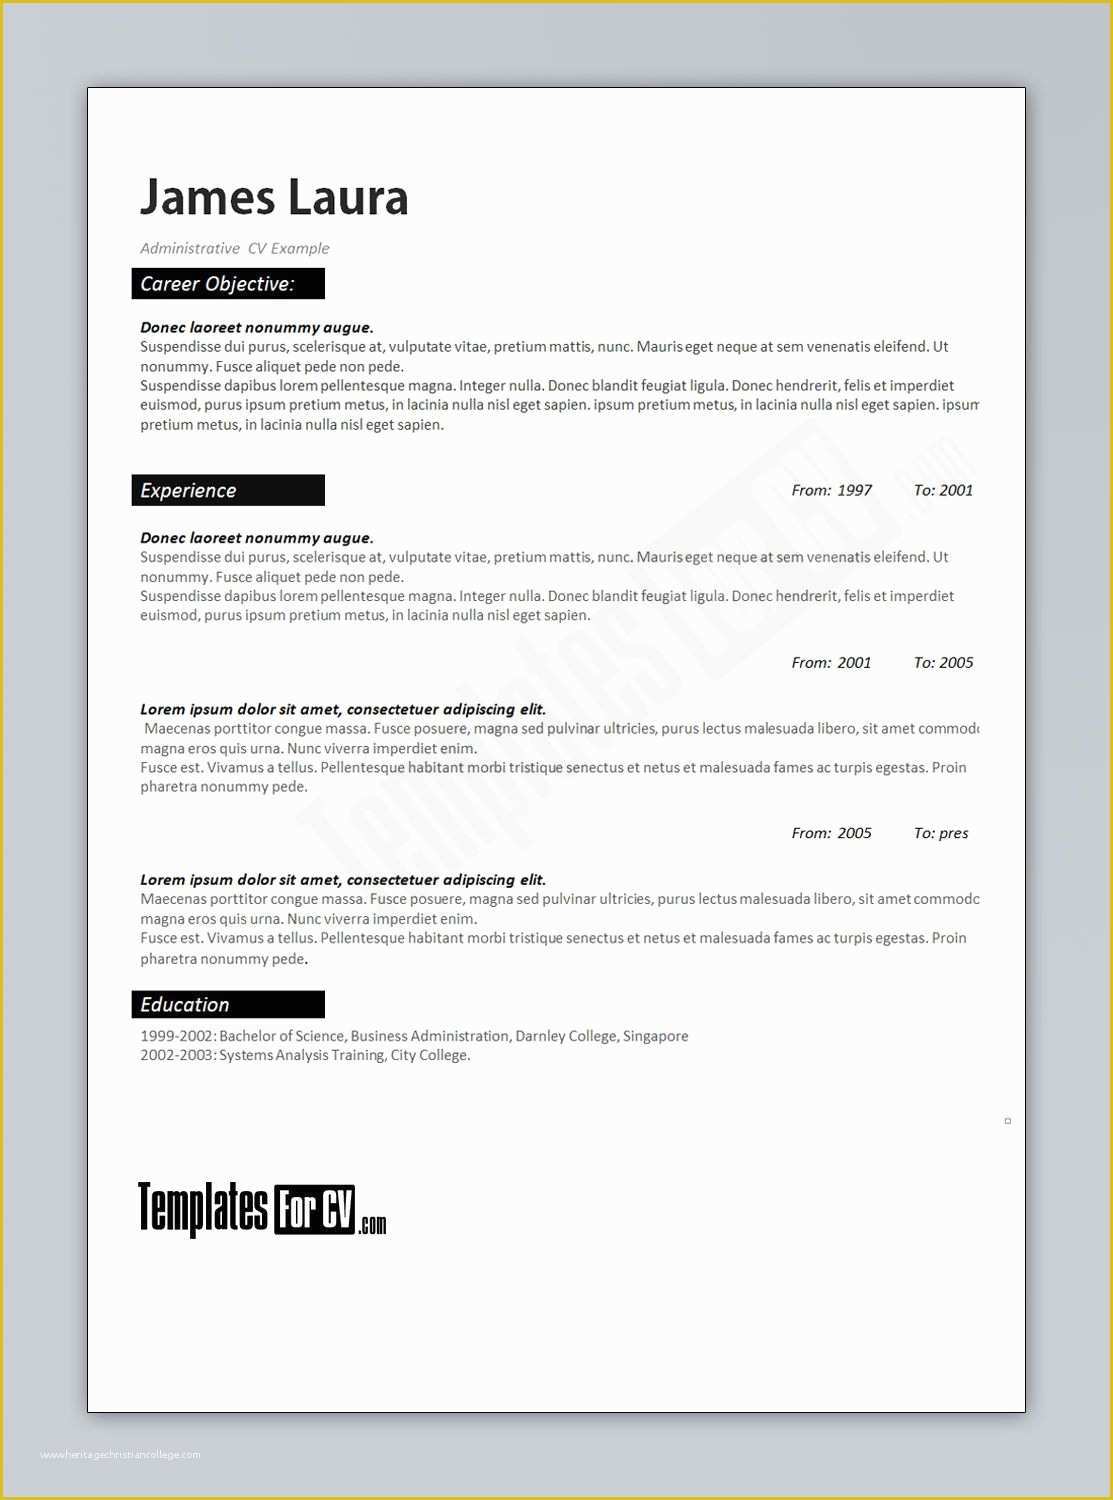 Free Template for Cv In Word Of Administrator Cv Template Cv Template Administrator